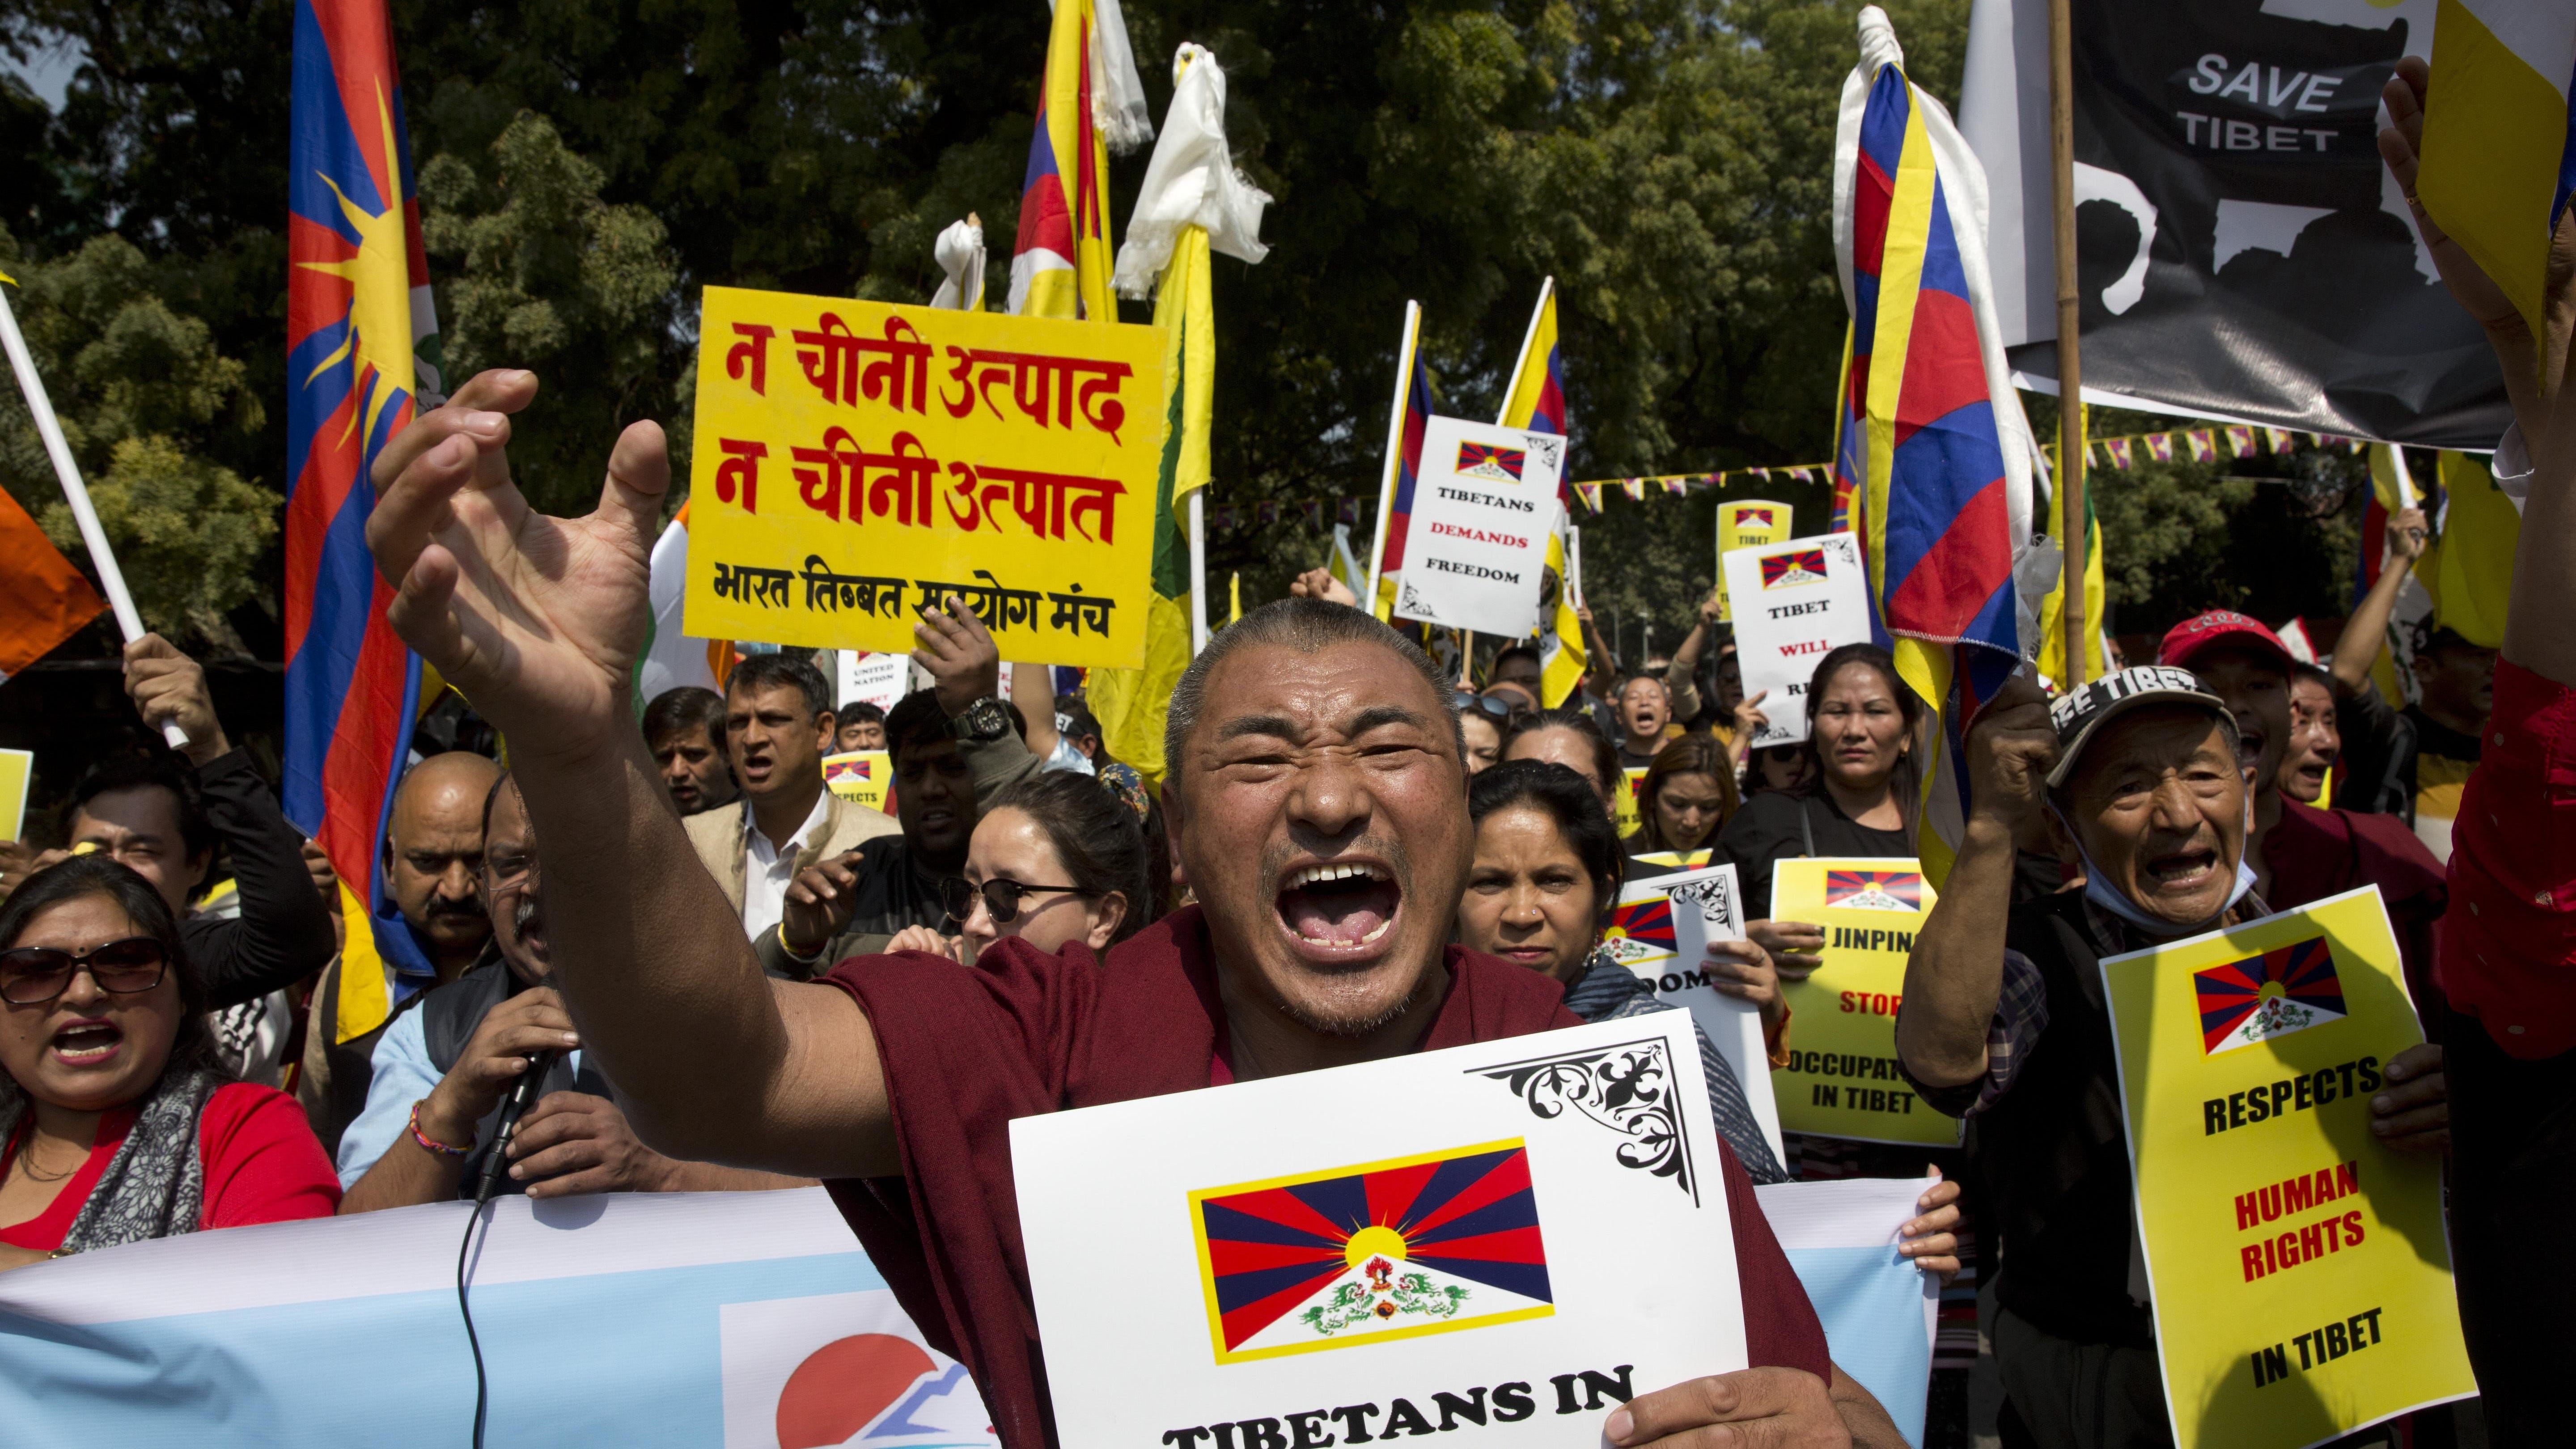 Exiled Tibetans shout slogans during a march to mark the 60th anniversary of the March 10, 1959, Tibetan Uprising Day, in New Delhi, India, Sunday, March 10, 2019.